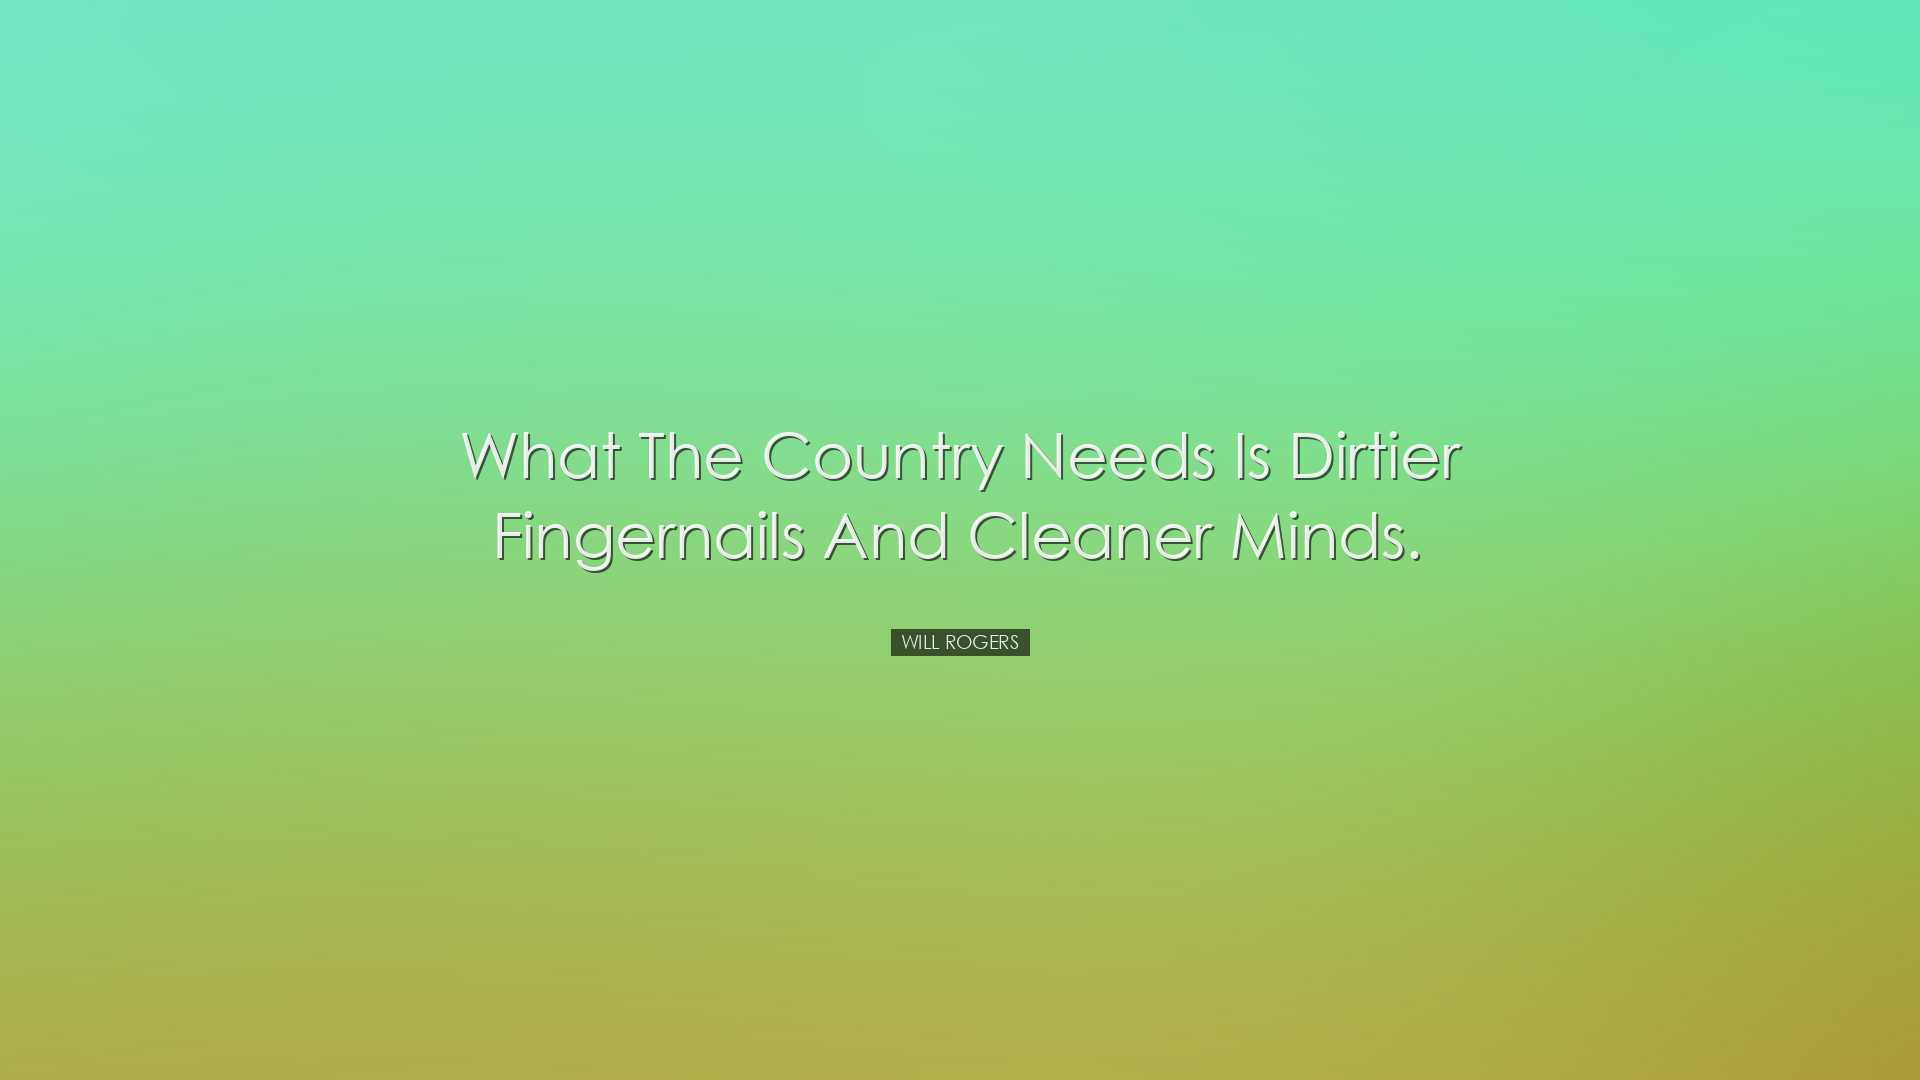 What the country needs is dirtier fingernails and cleaner minds. -